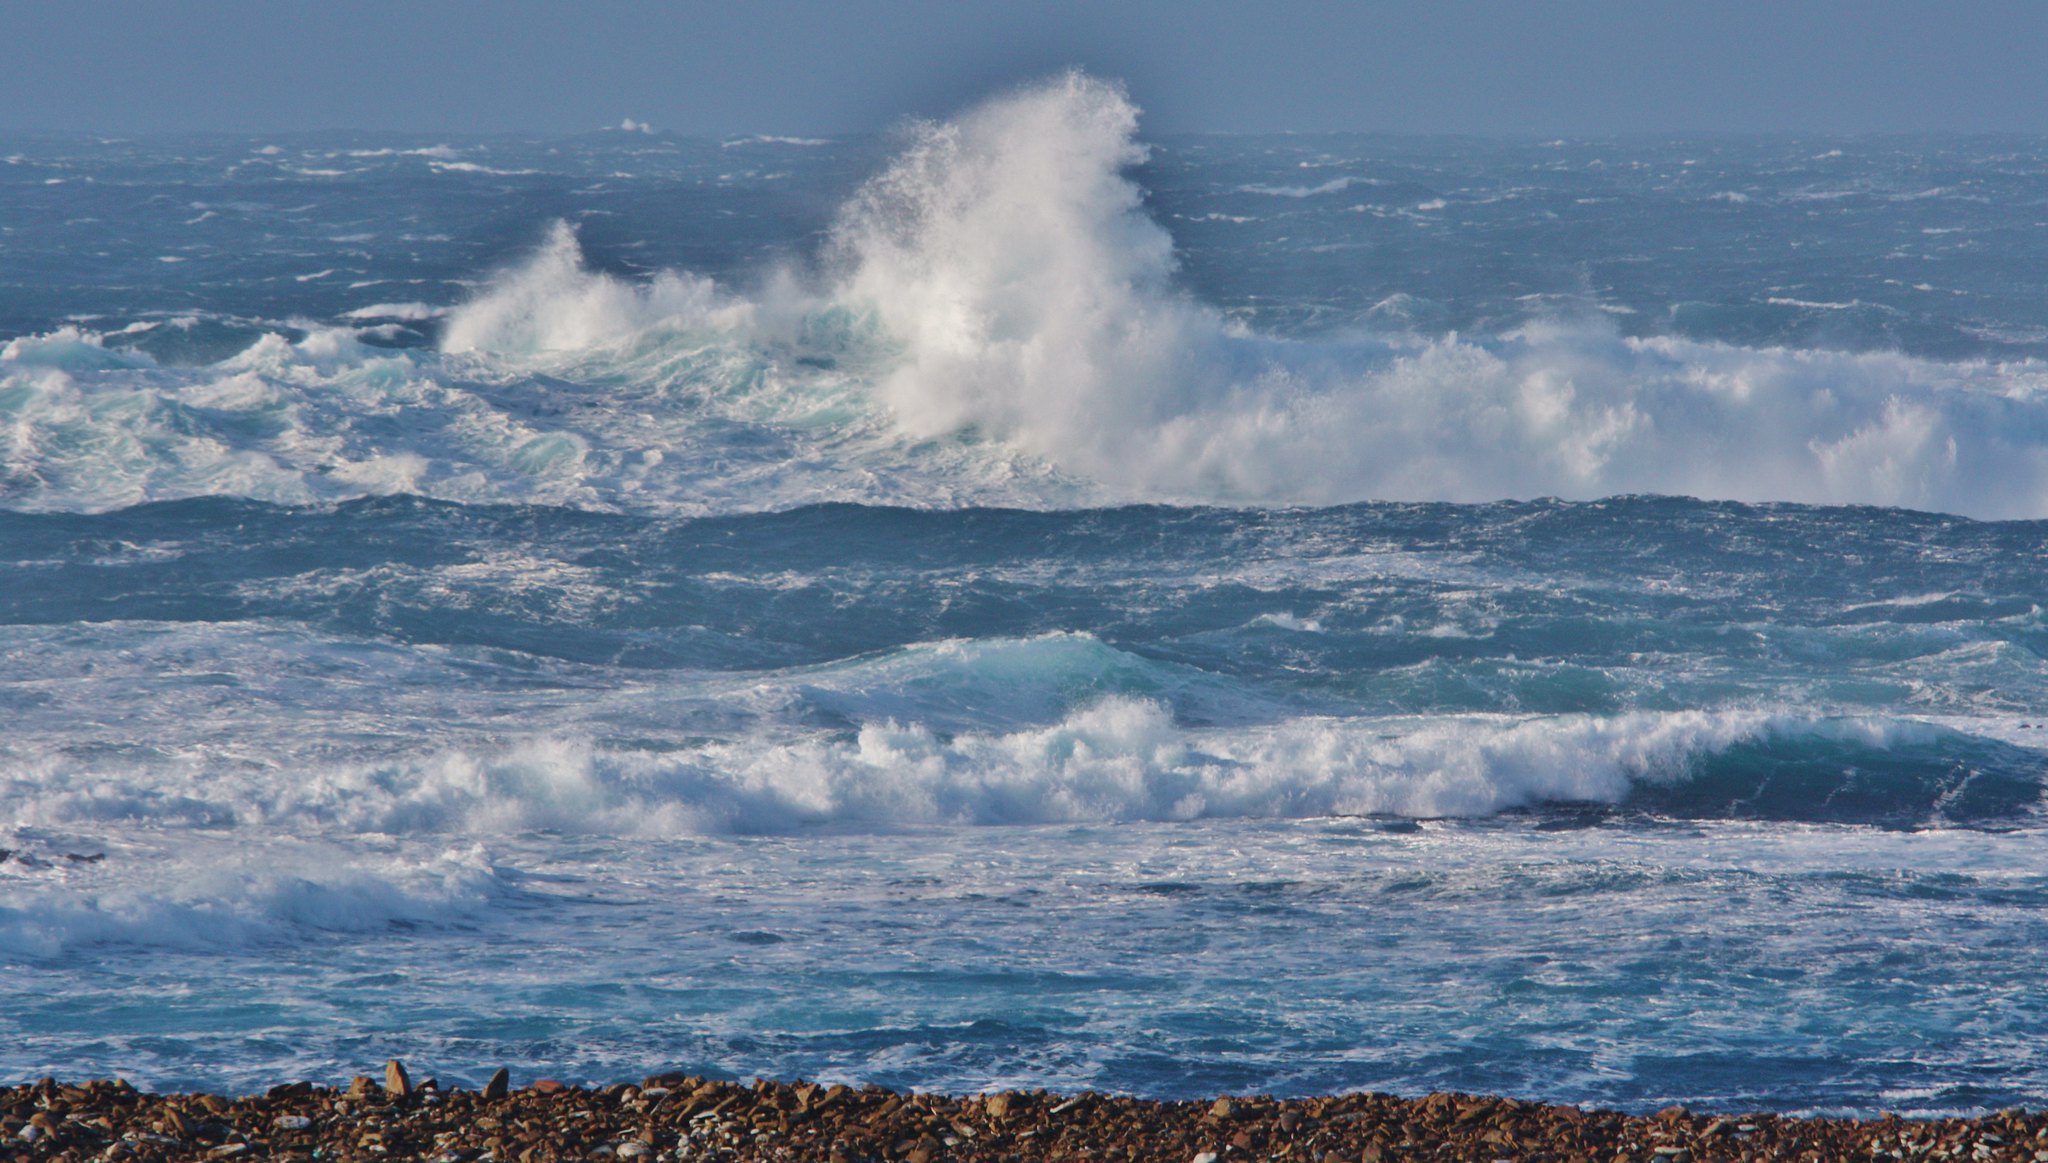 Stormy sea and waves crashing against a stony beach.